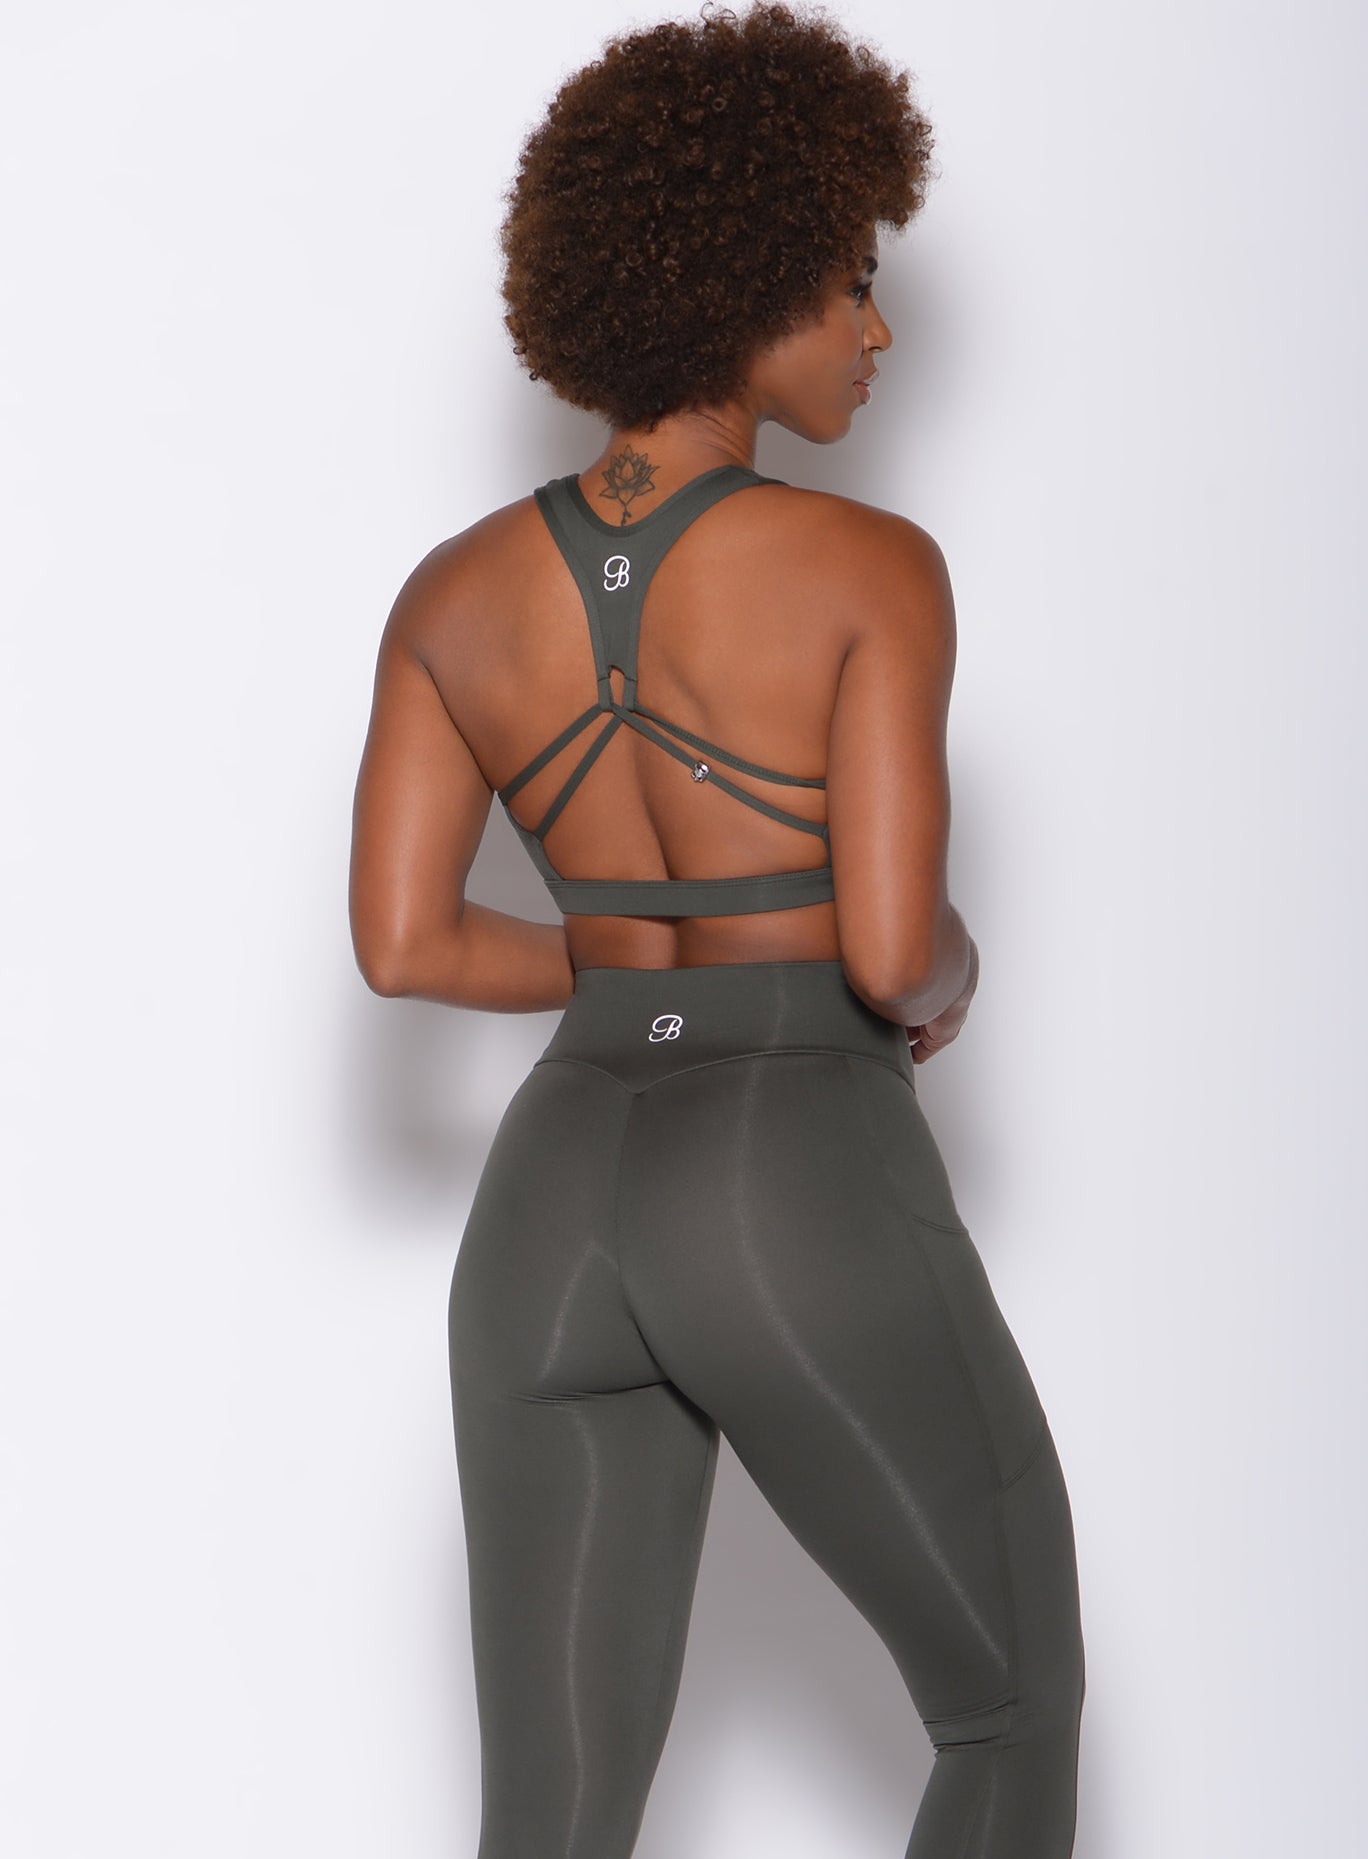 back view of model in a cute strappy back sports bra with a kettlebell skull charm detail